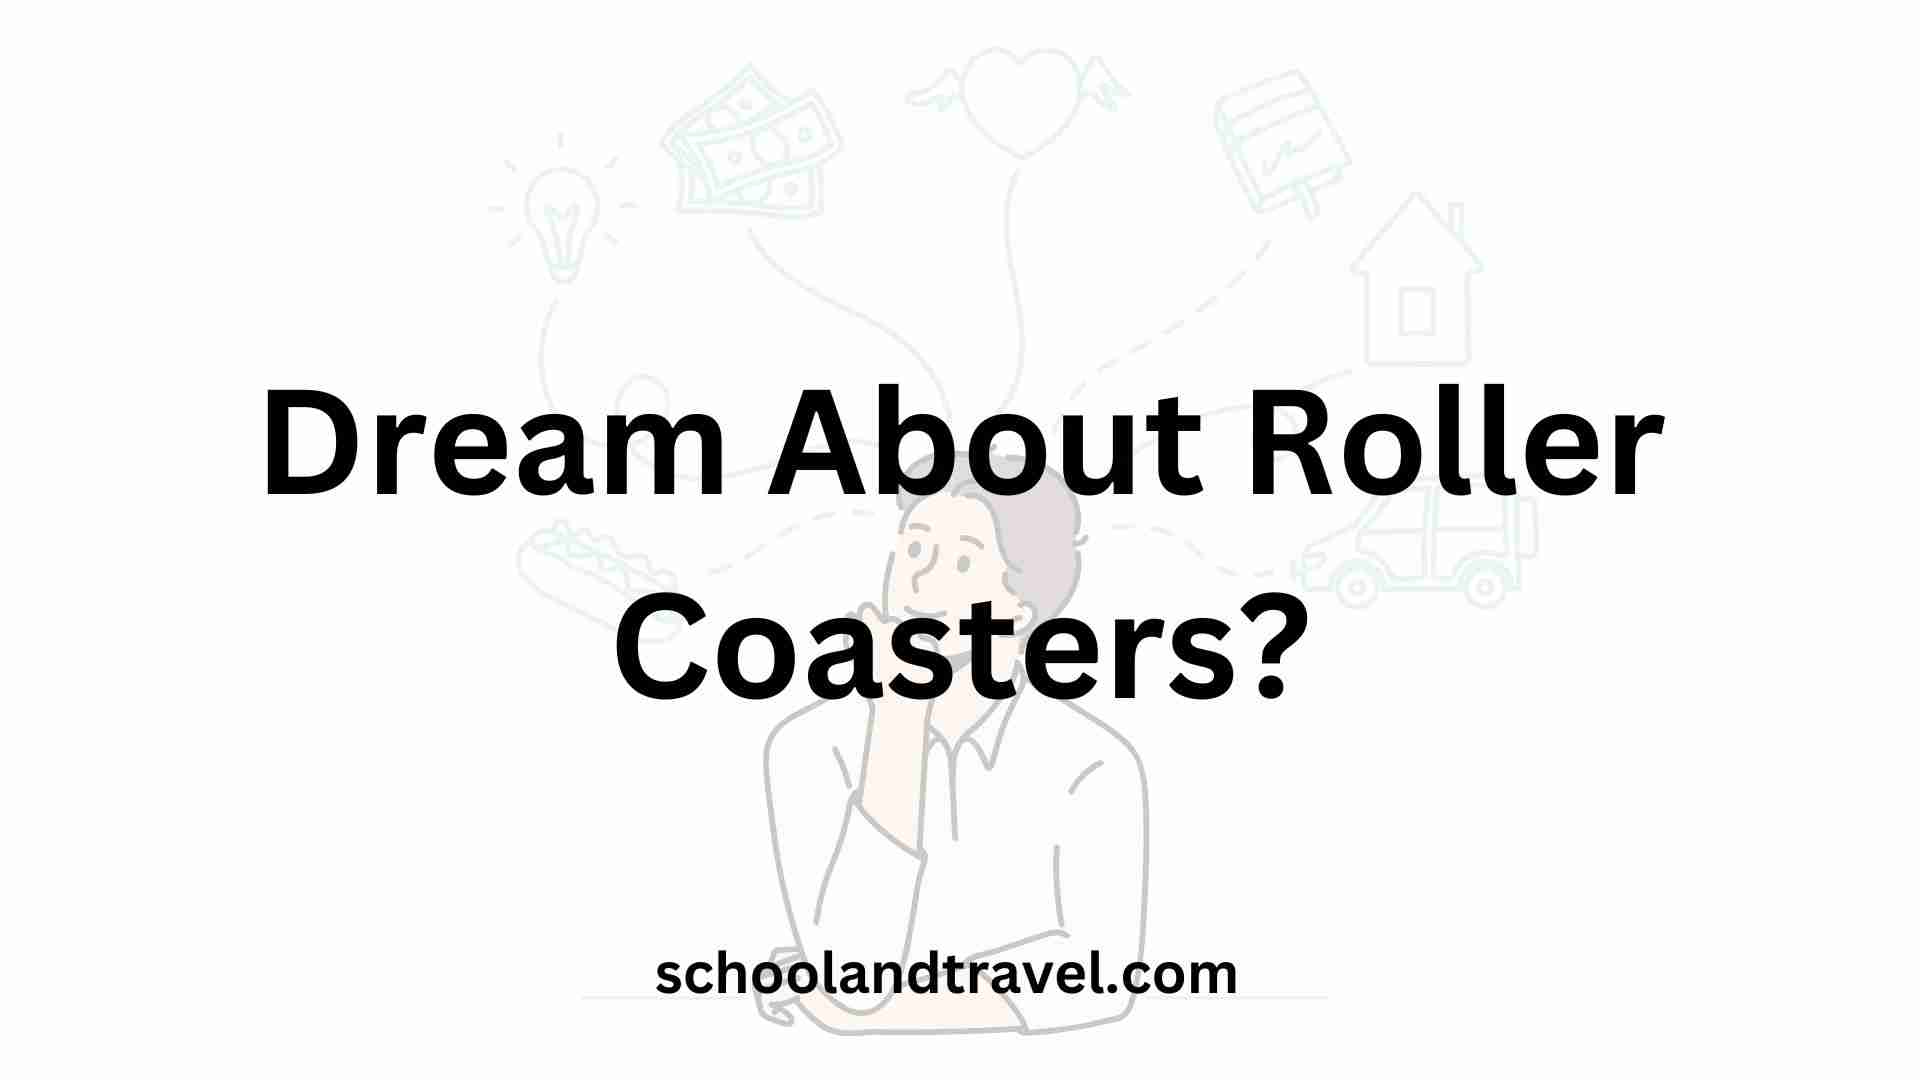 What Does it Mean When You Dream About Roller Coasters?